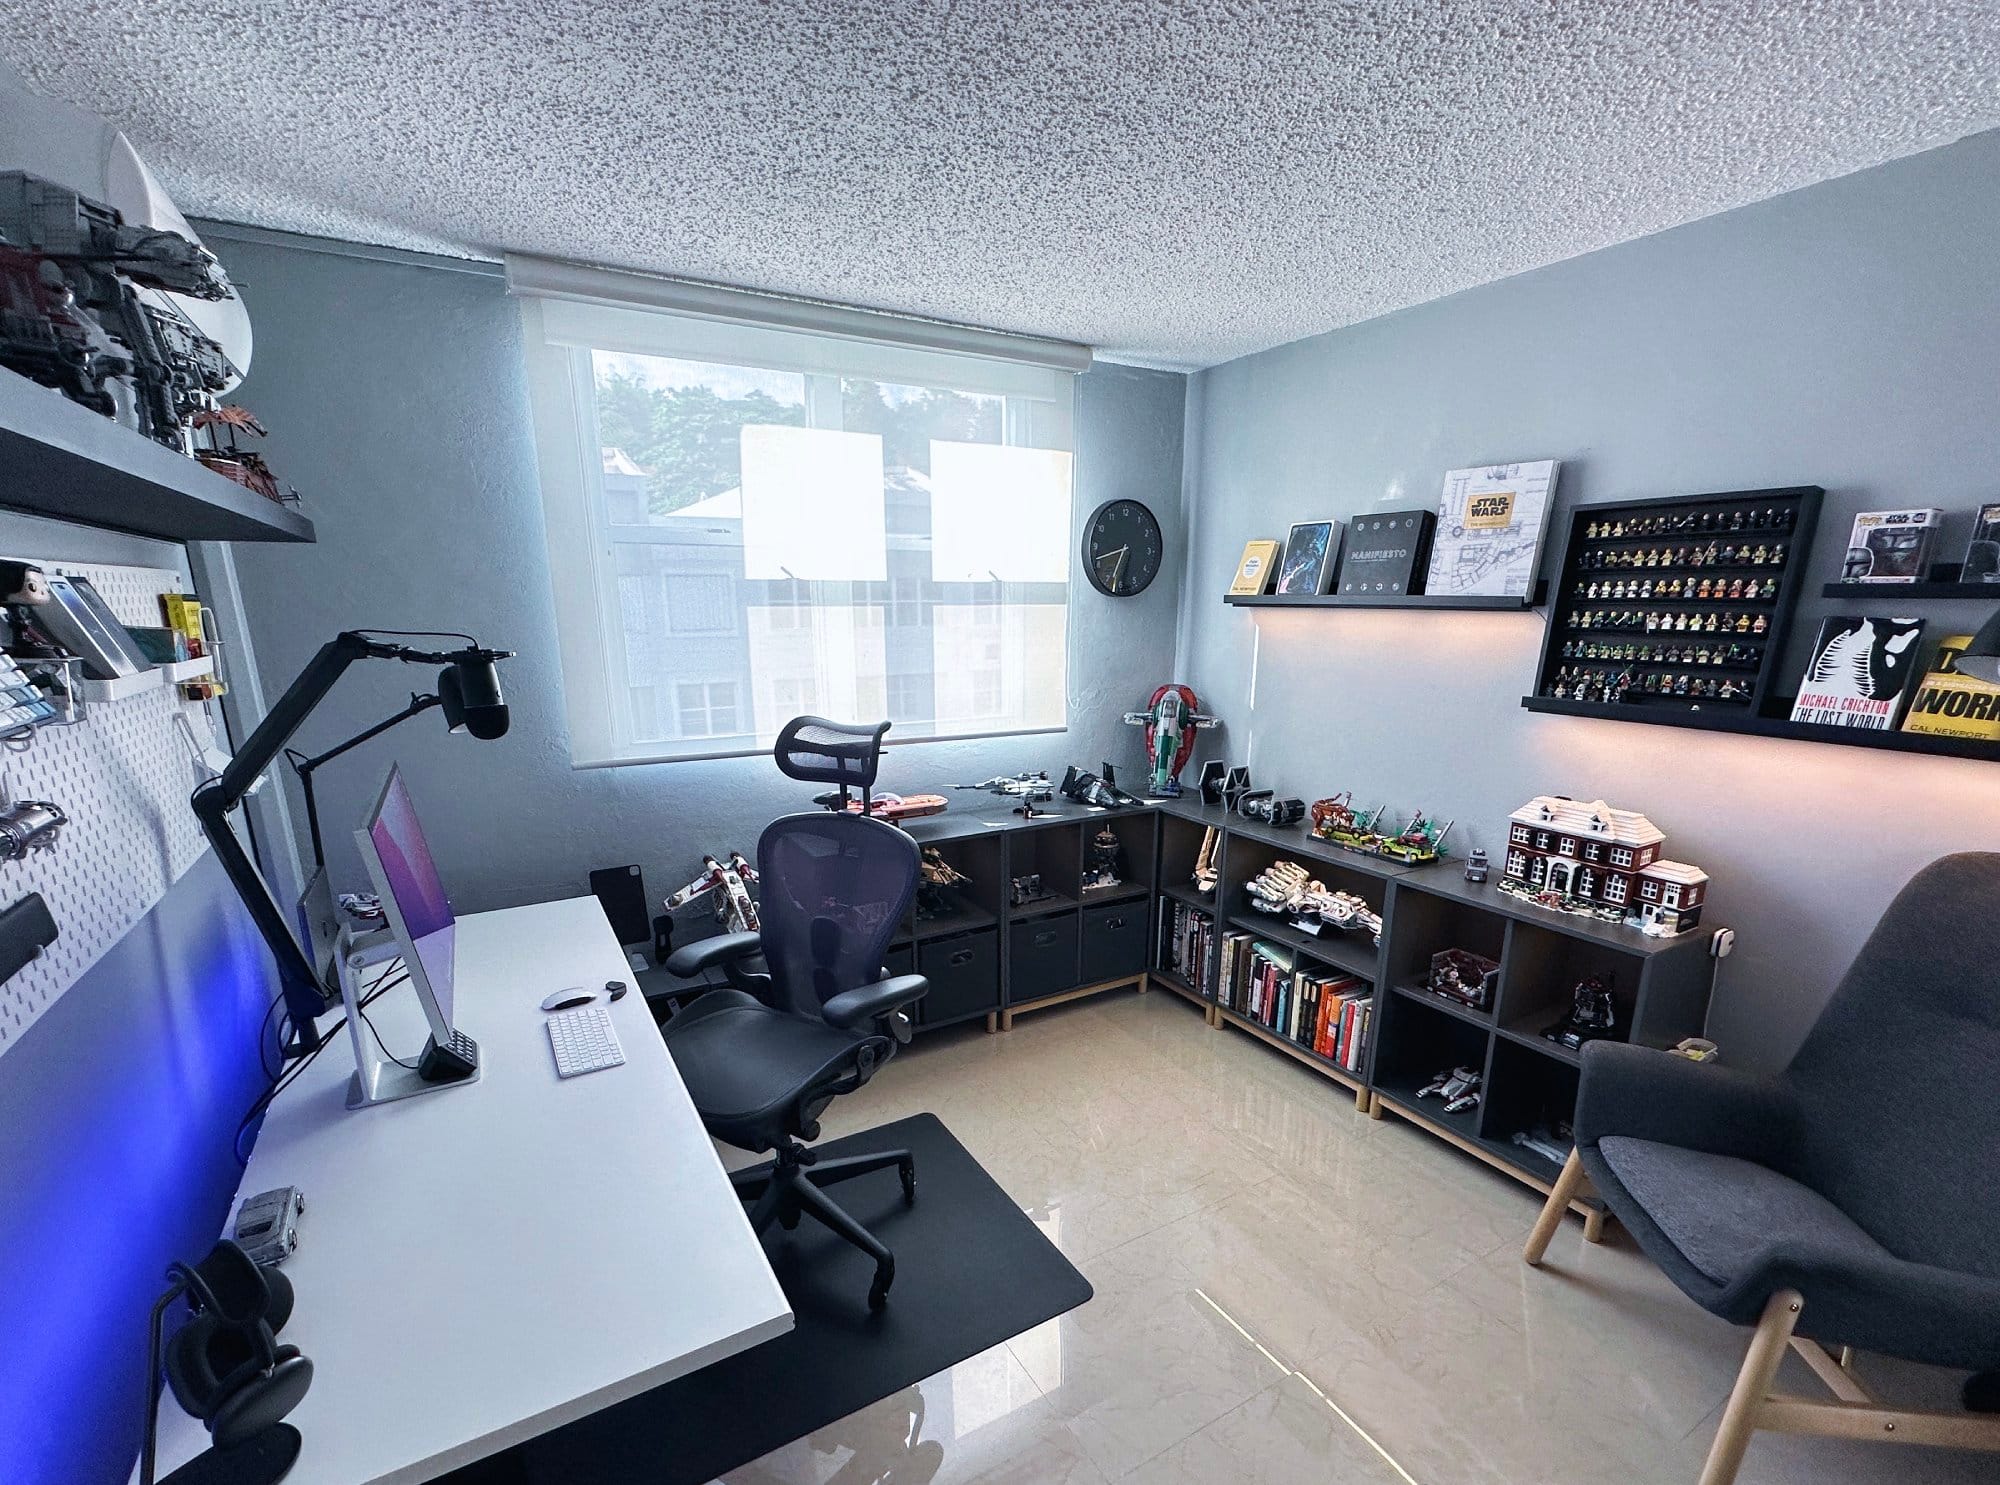  An organised office room with a desk, ergonomic chair, computer setup, shelves with books and collectibles, and decorative wall art